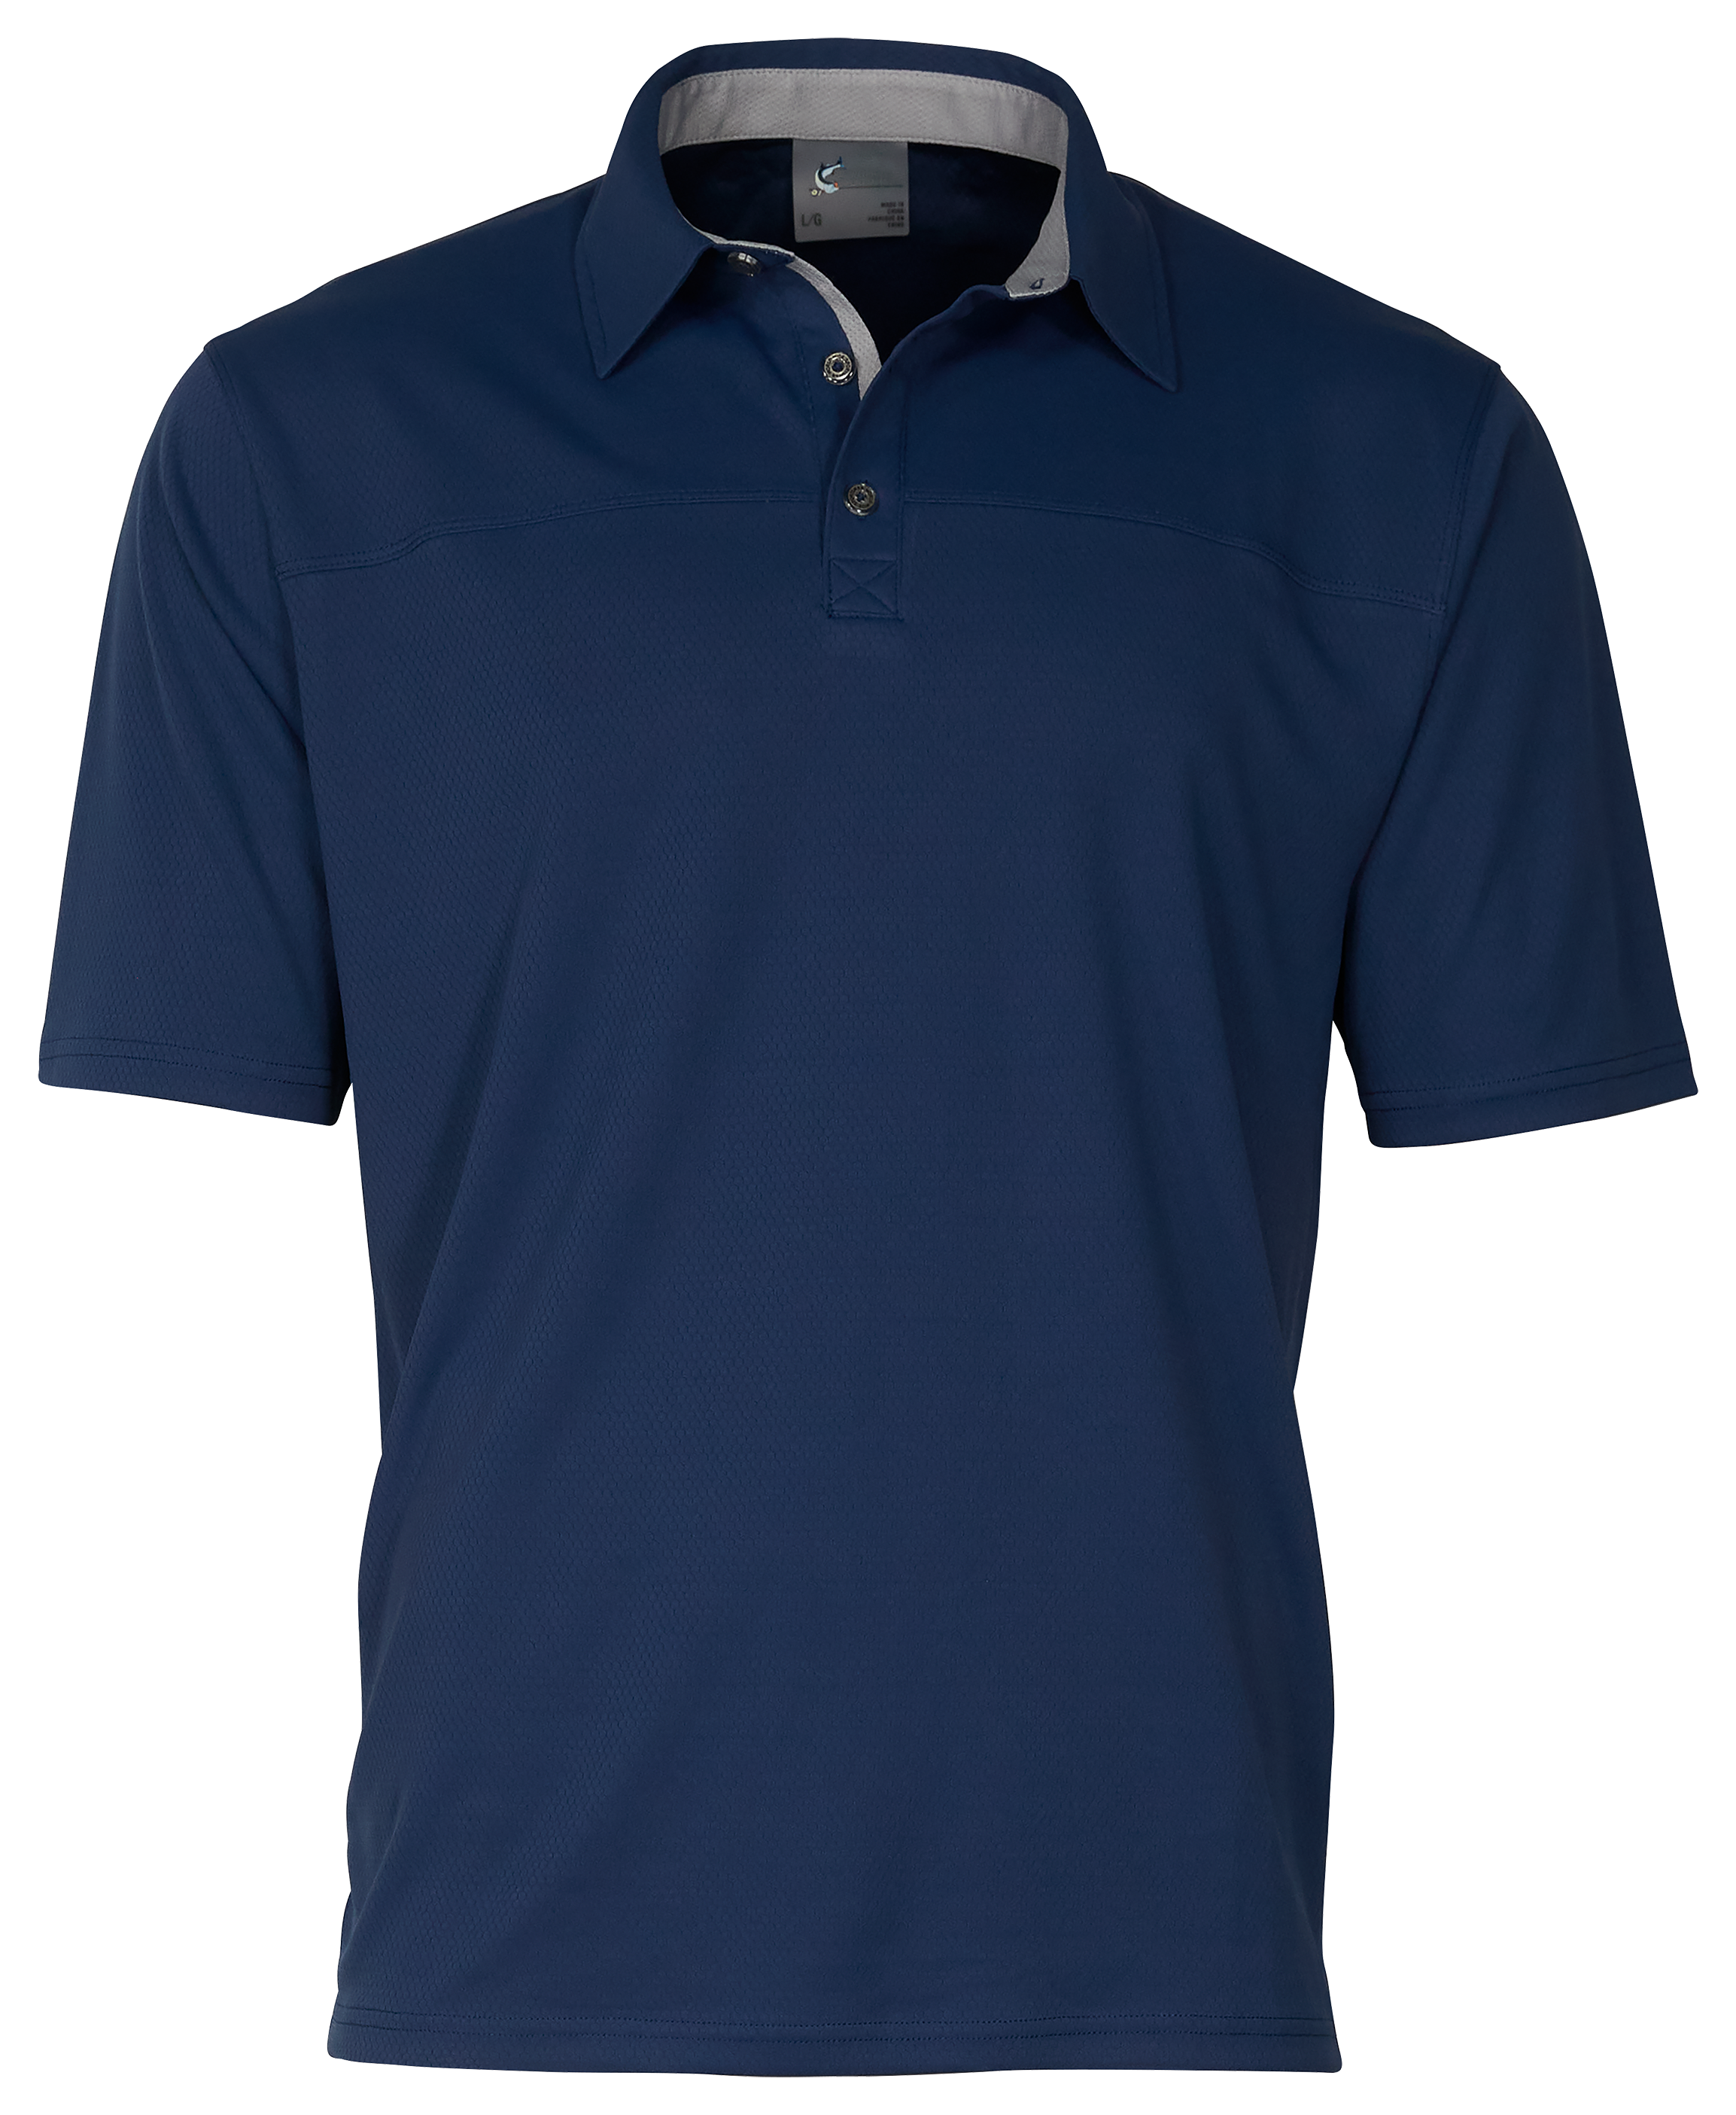 World Wide Sportsman Short-Sleeve Polo for Men - Insignia Blue - S